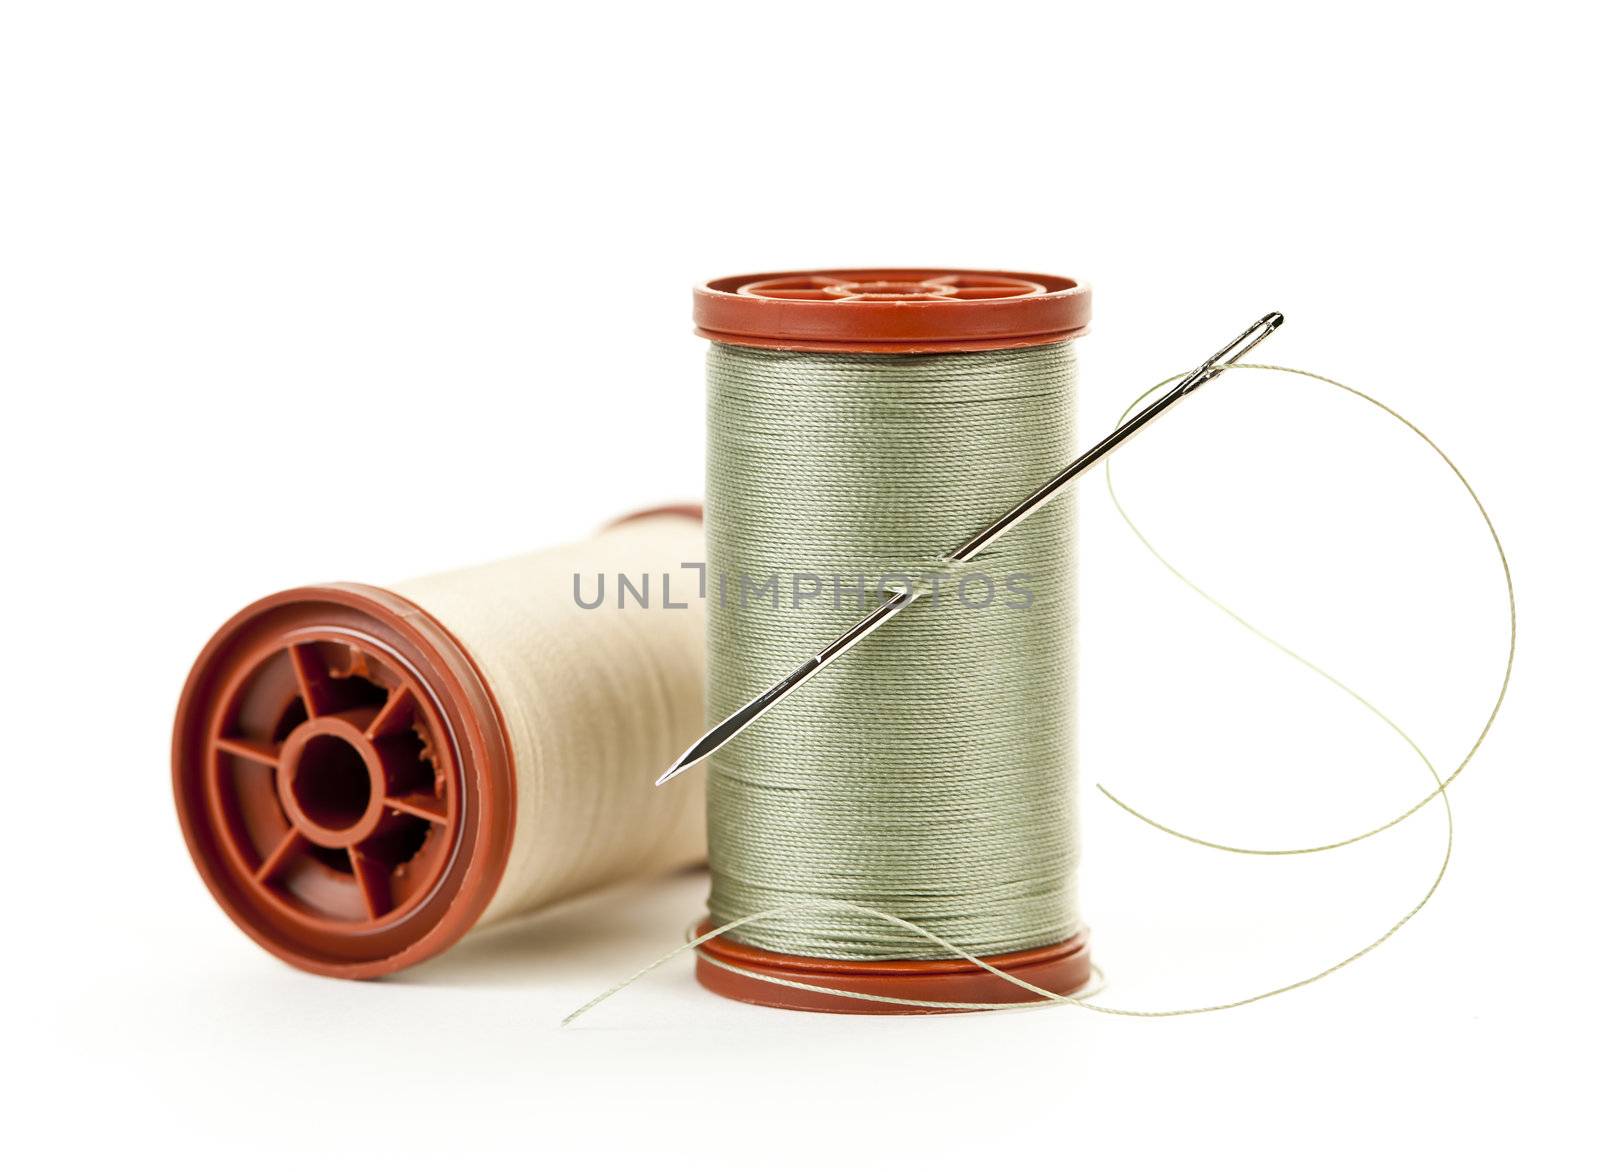 Two spools of thread with needle for sewing isolated on white background